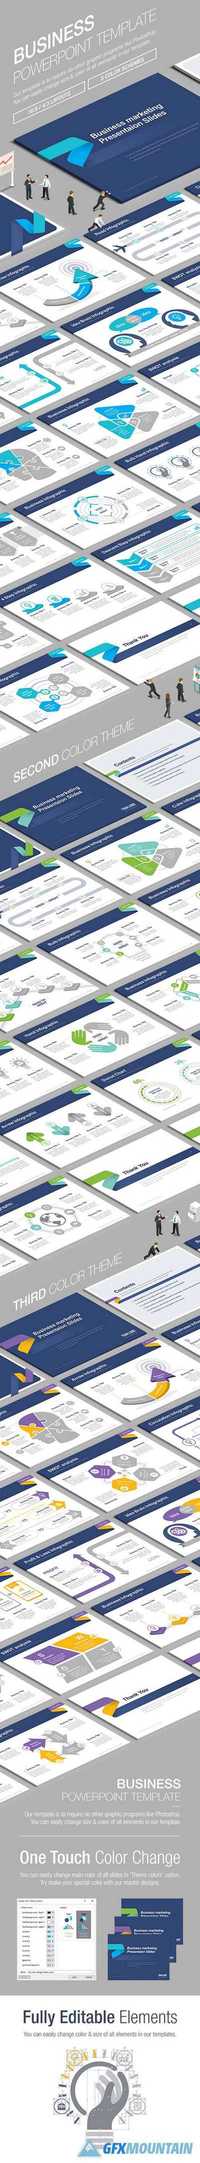 Graphicriver - Business Powerpoint Template 006 17648242